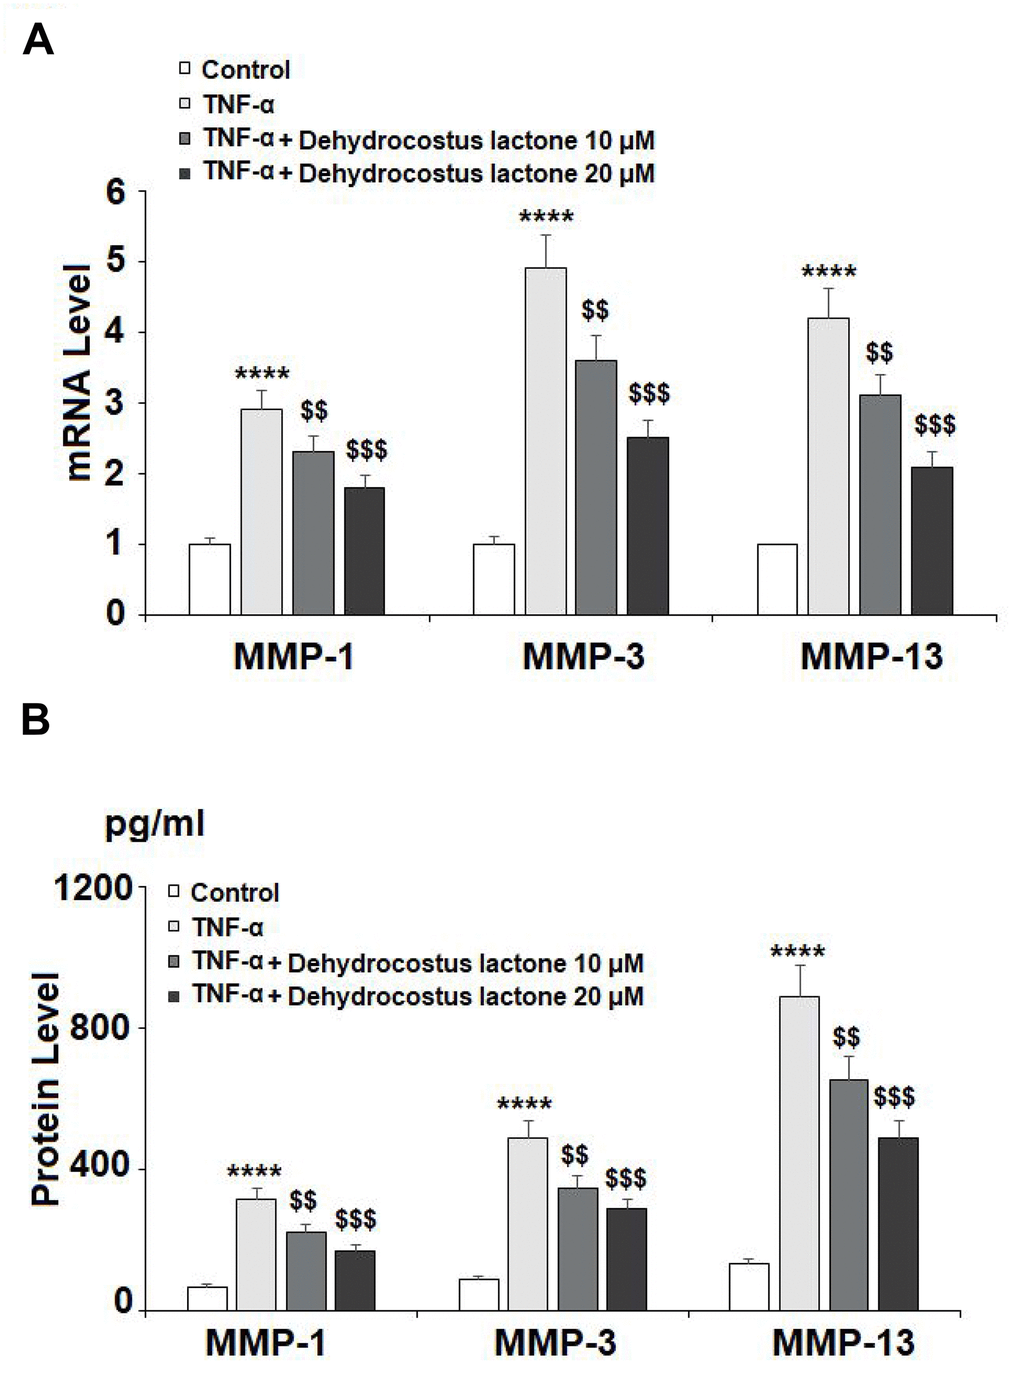 DHC reduced TNF-α- induced expression of MMP-1, MMP-3, and MMP-13. Cells were stimulated with TNF-α (10 ng/ml) in the presence or absence of 10 and 20 μM for 24 h. (A). mRNA of MMP-1, MMP-3, and MMP-13 as measured by real time PCR; (B). Protein of MMP-1, MMP-3, and MMP-13 as measured by ELISA (****, P